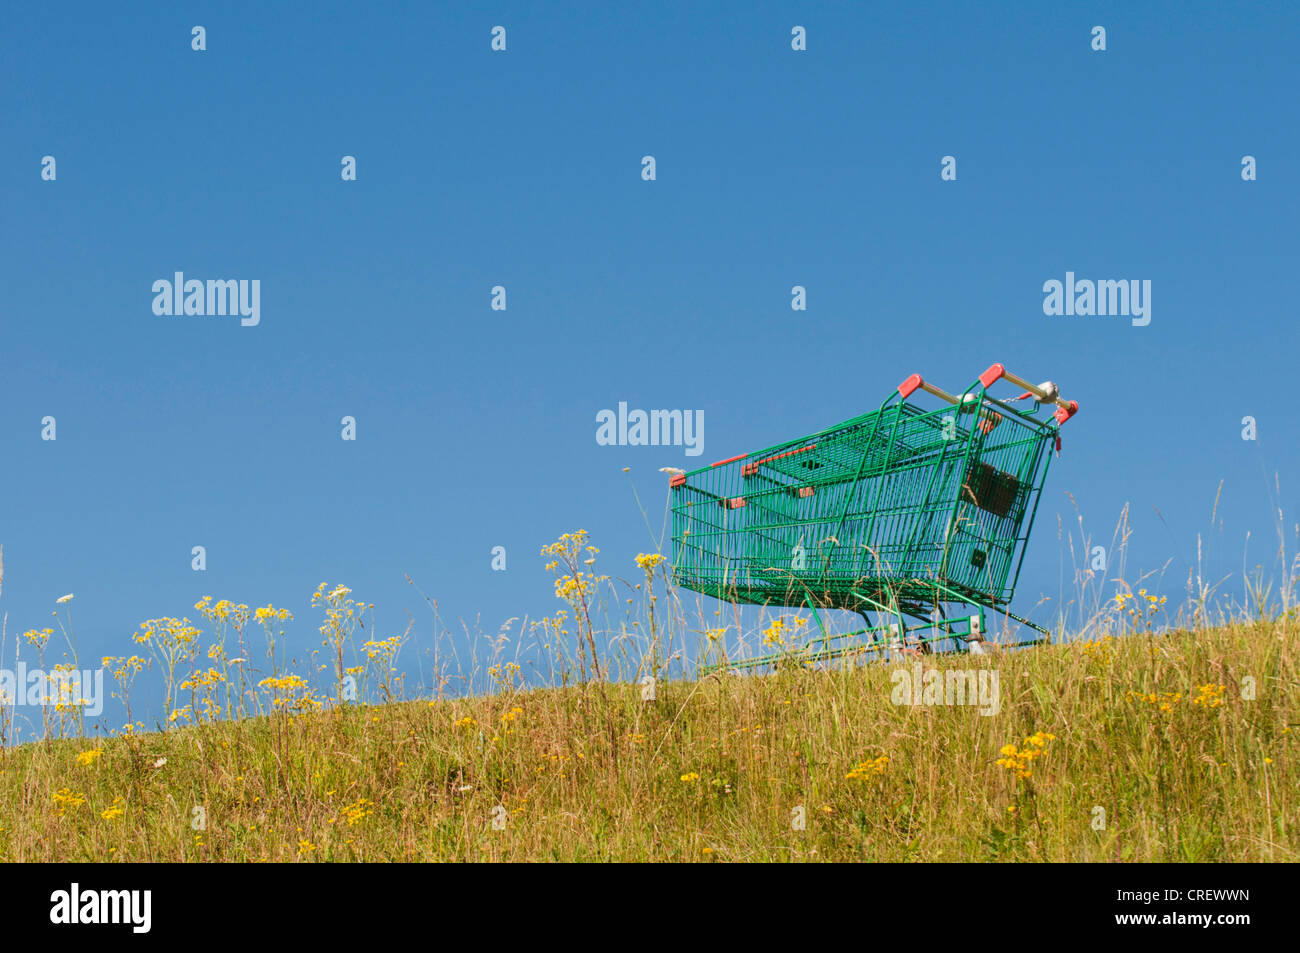 shopping cart; symbolic for out-of-town shopping centres Stock Photo